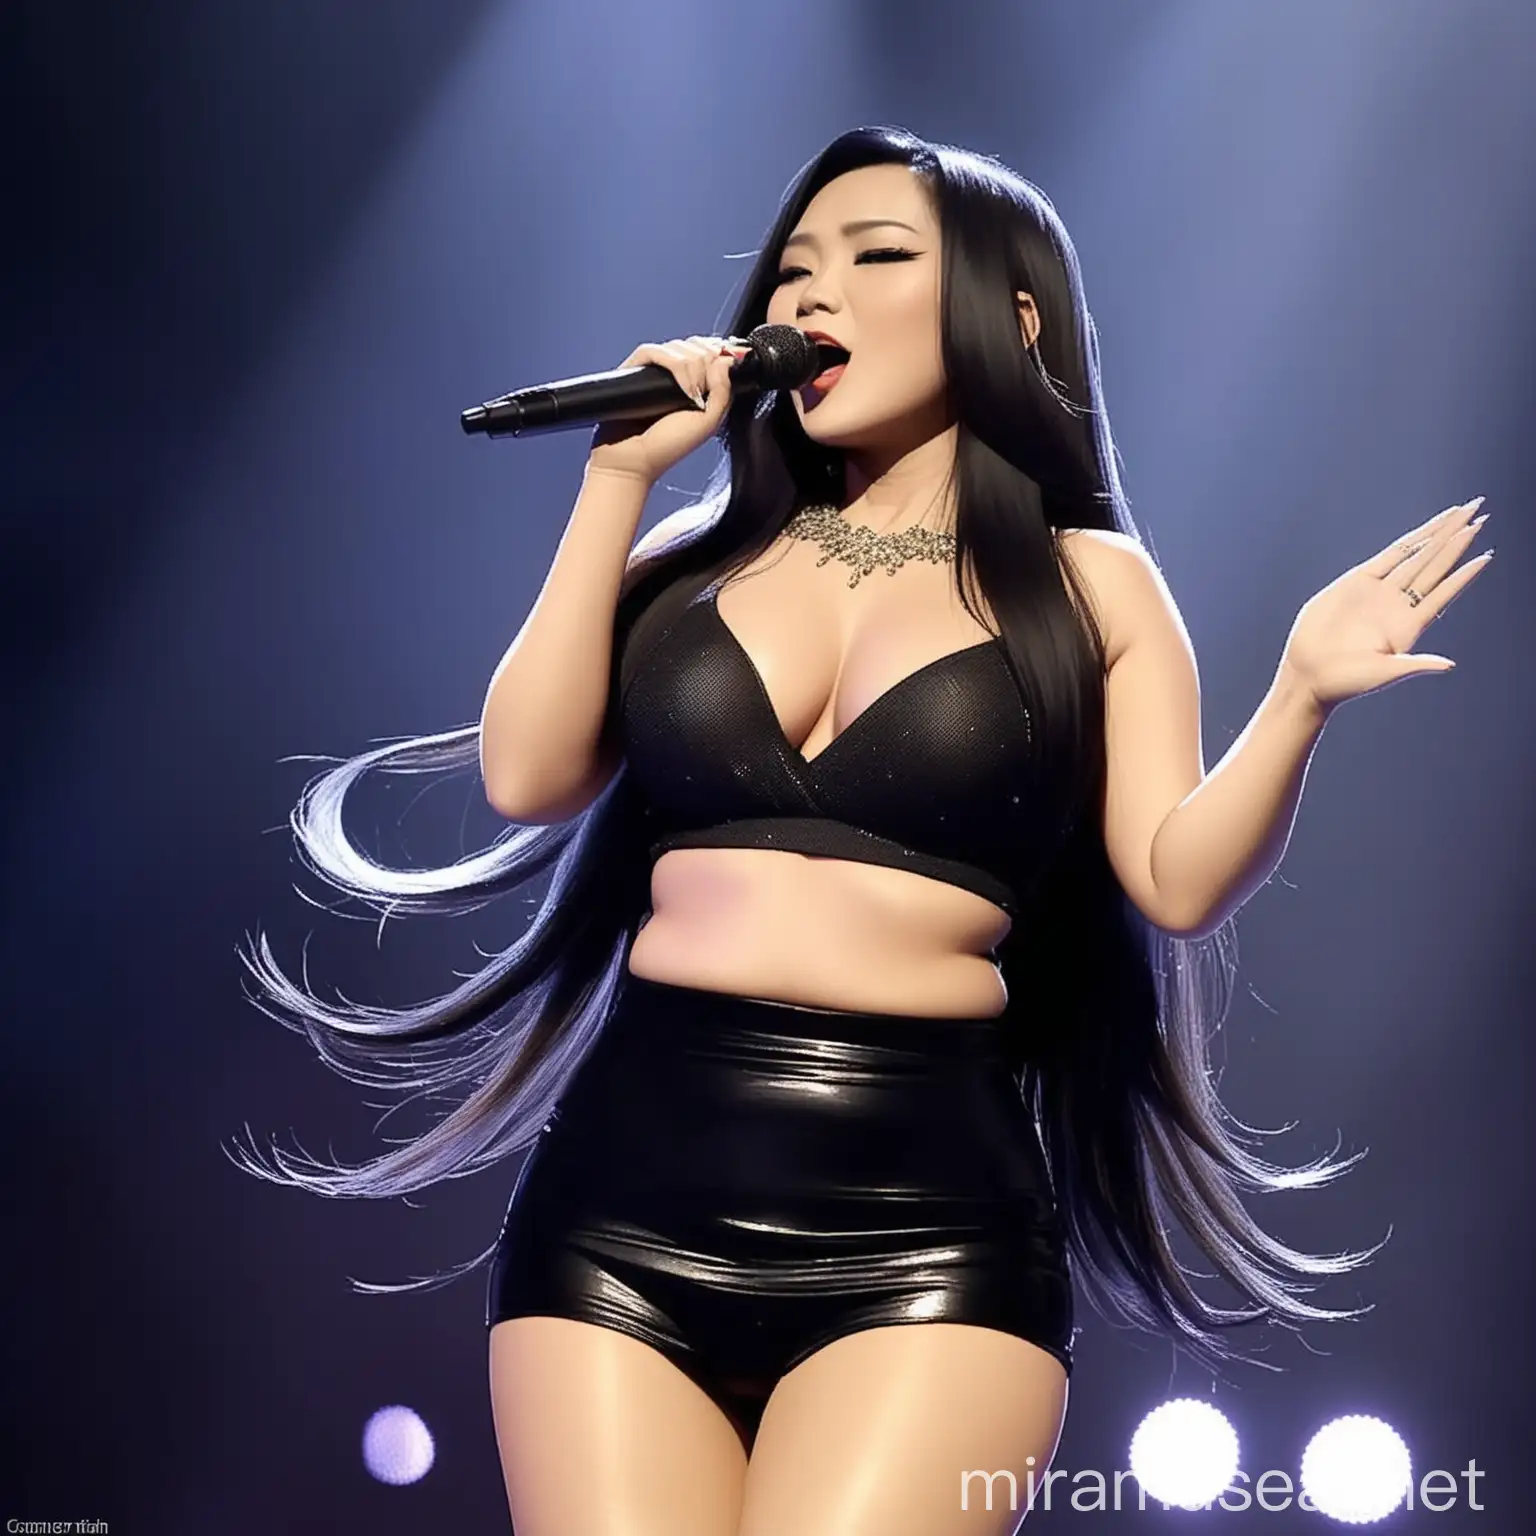 Sultry Indonesian Songstress in Revealing Concert Attire